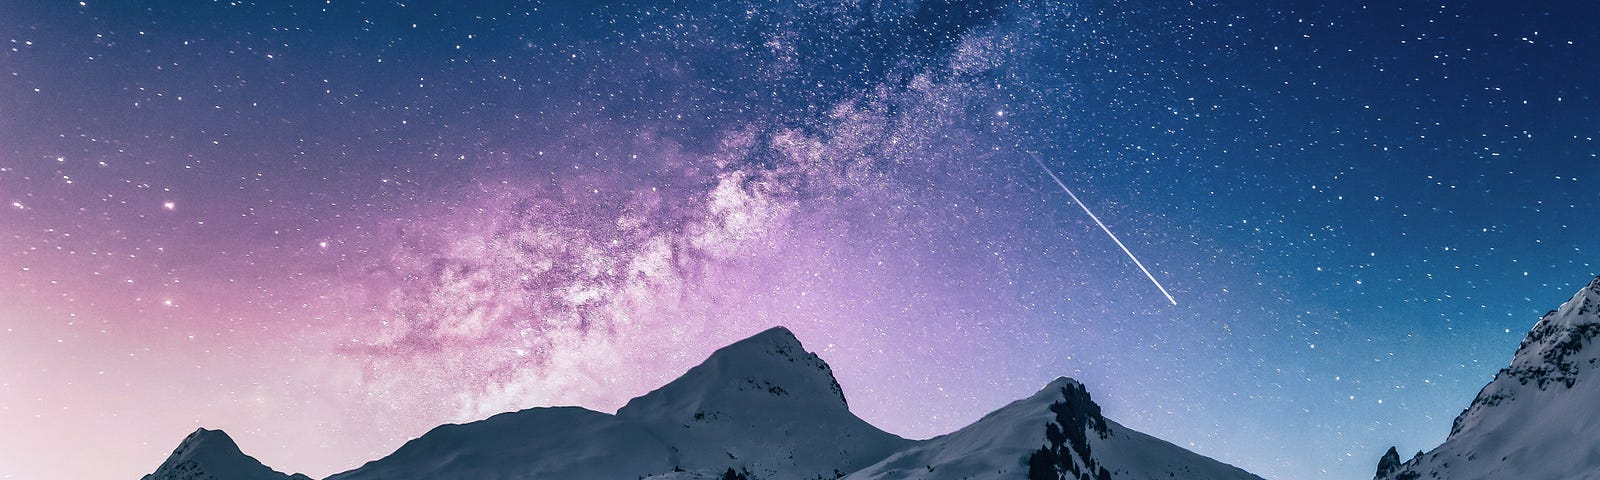 In a starry night, a shooting star heads toward snow-covered mountains